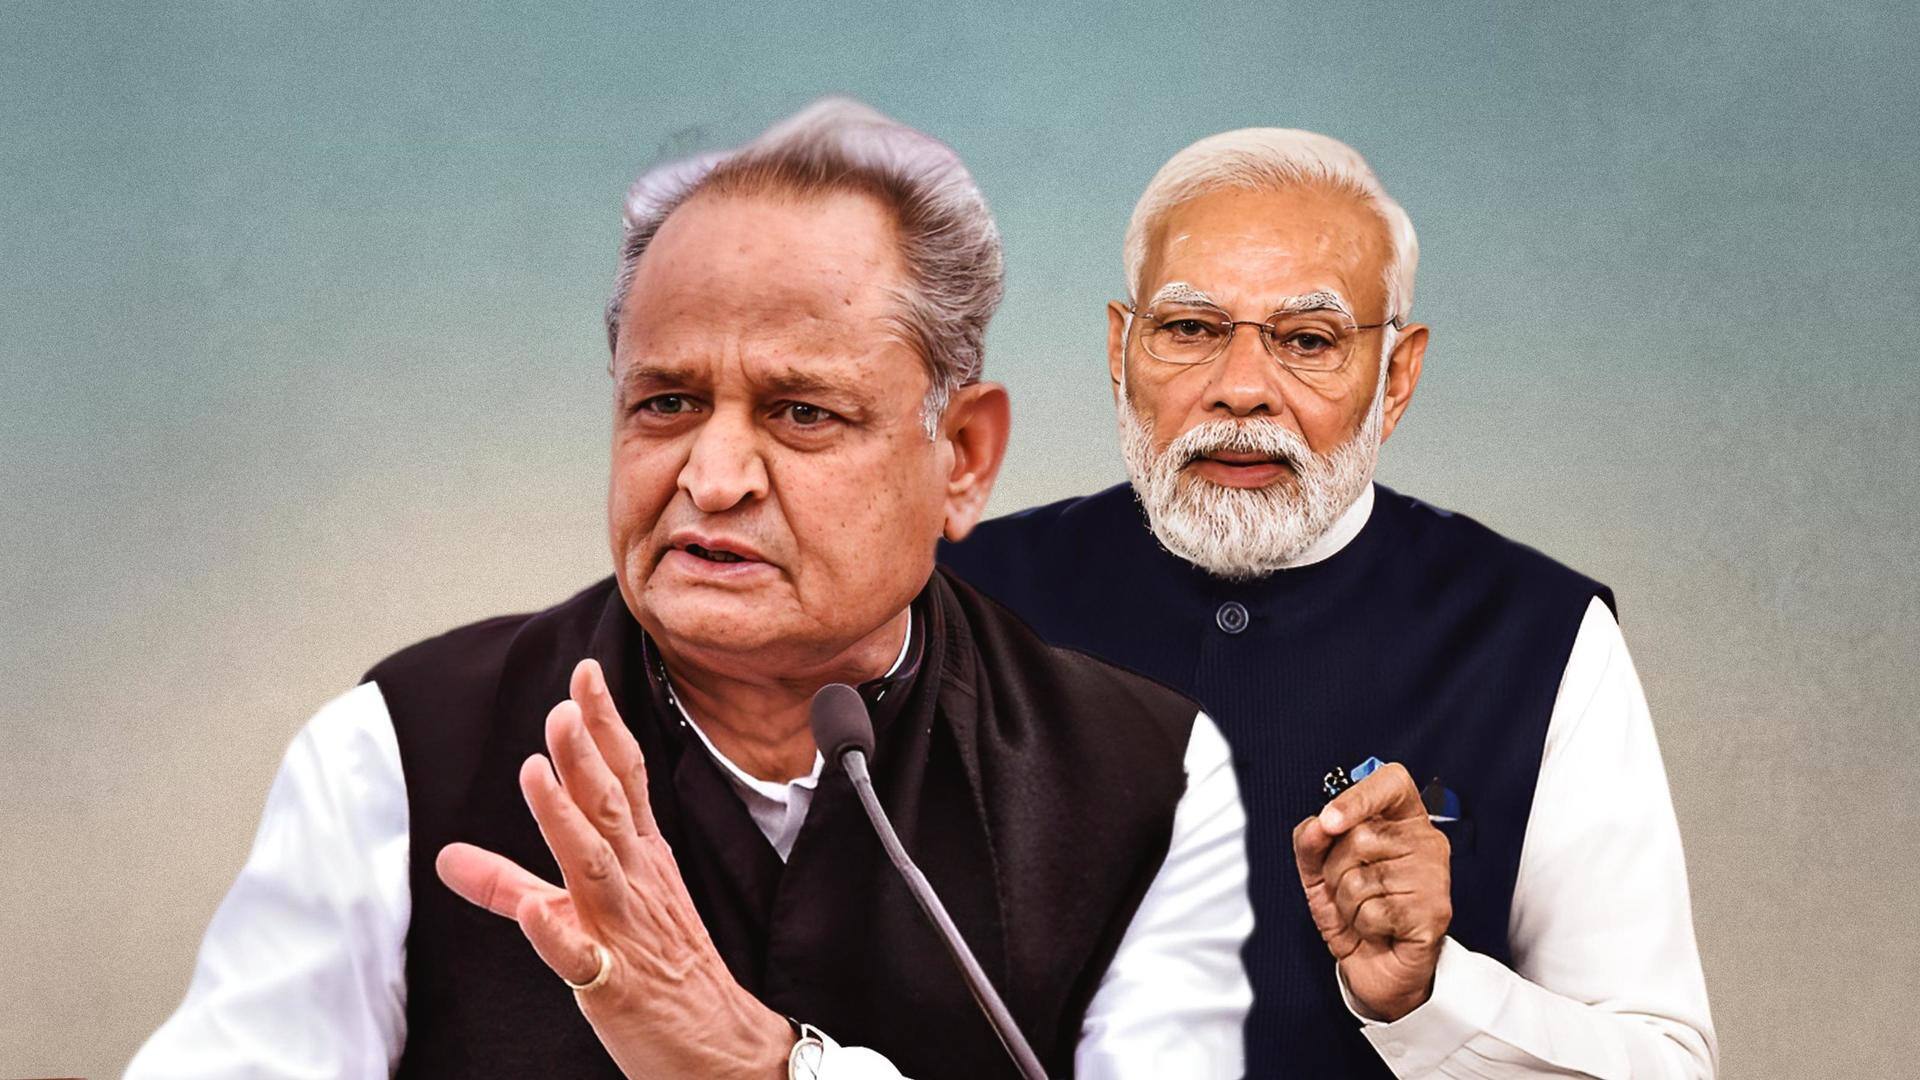 Gehlot claims his speech dropped from Modi event, PMO responds